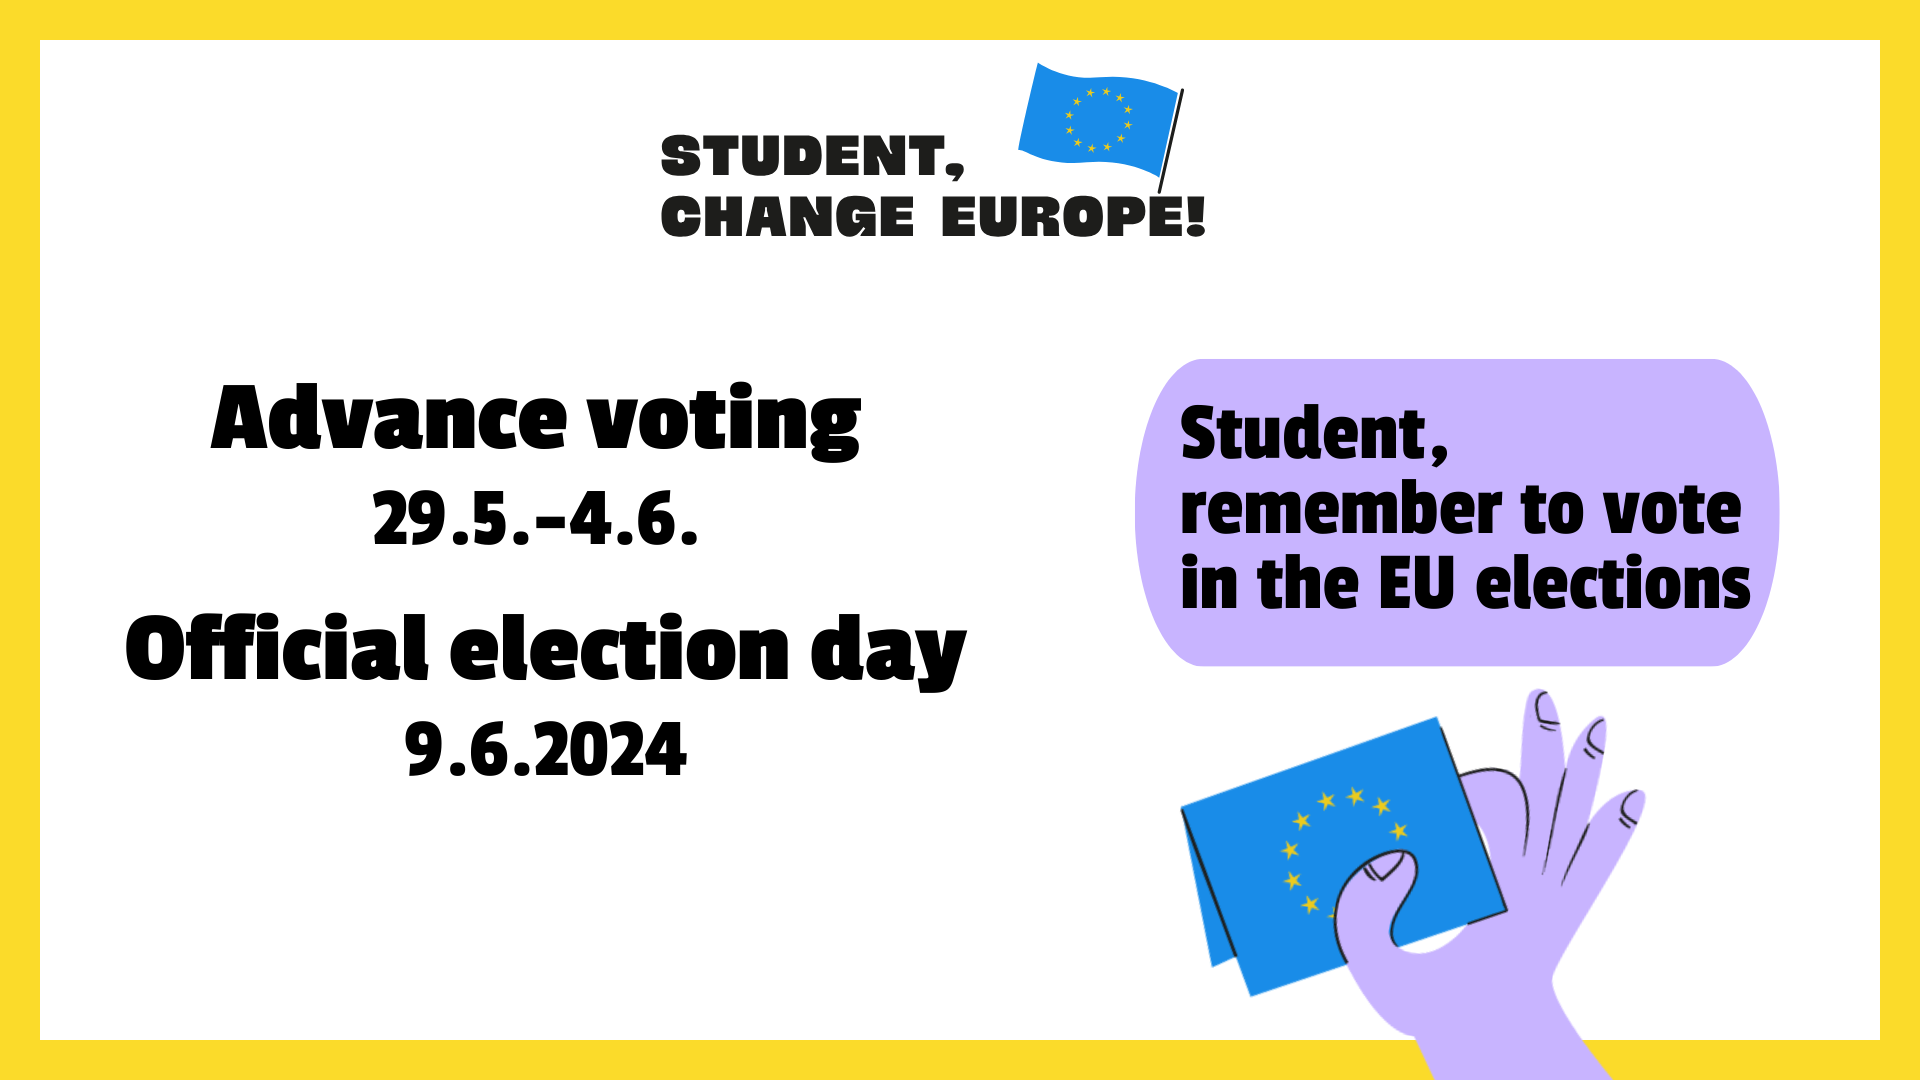 By voting in the EU elections, you also influence students’ rights!